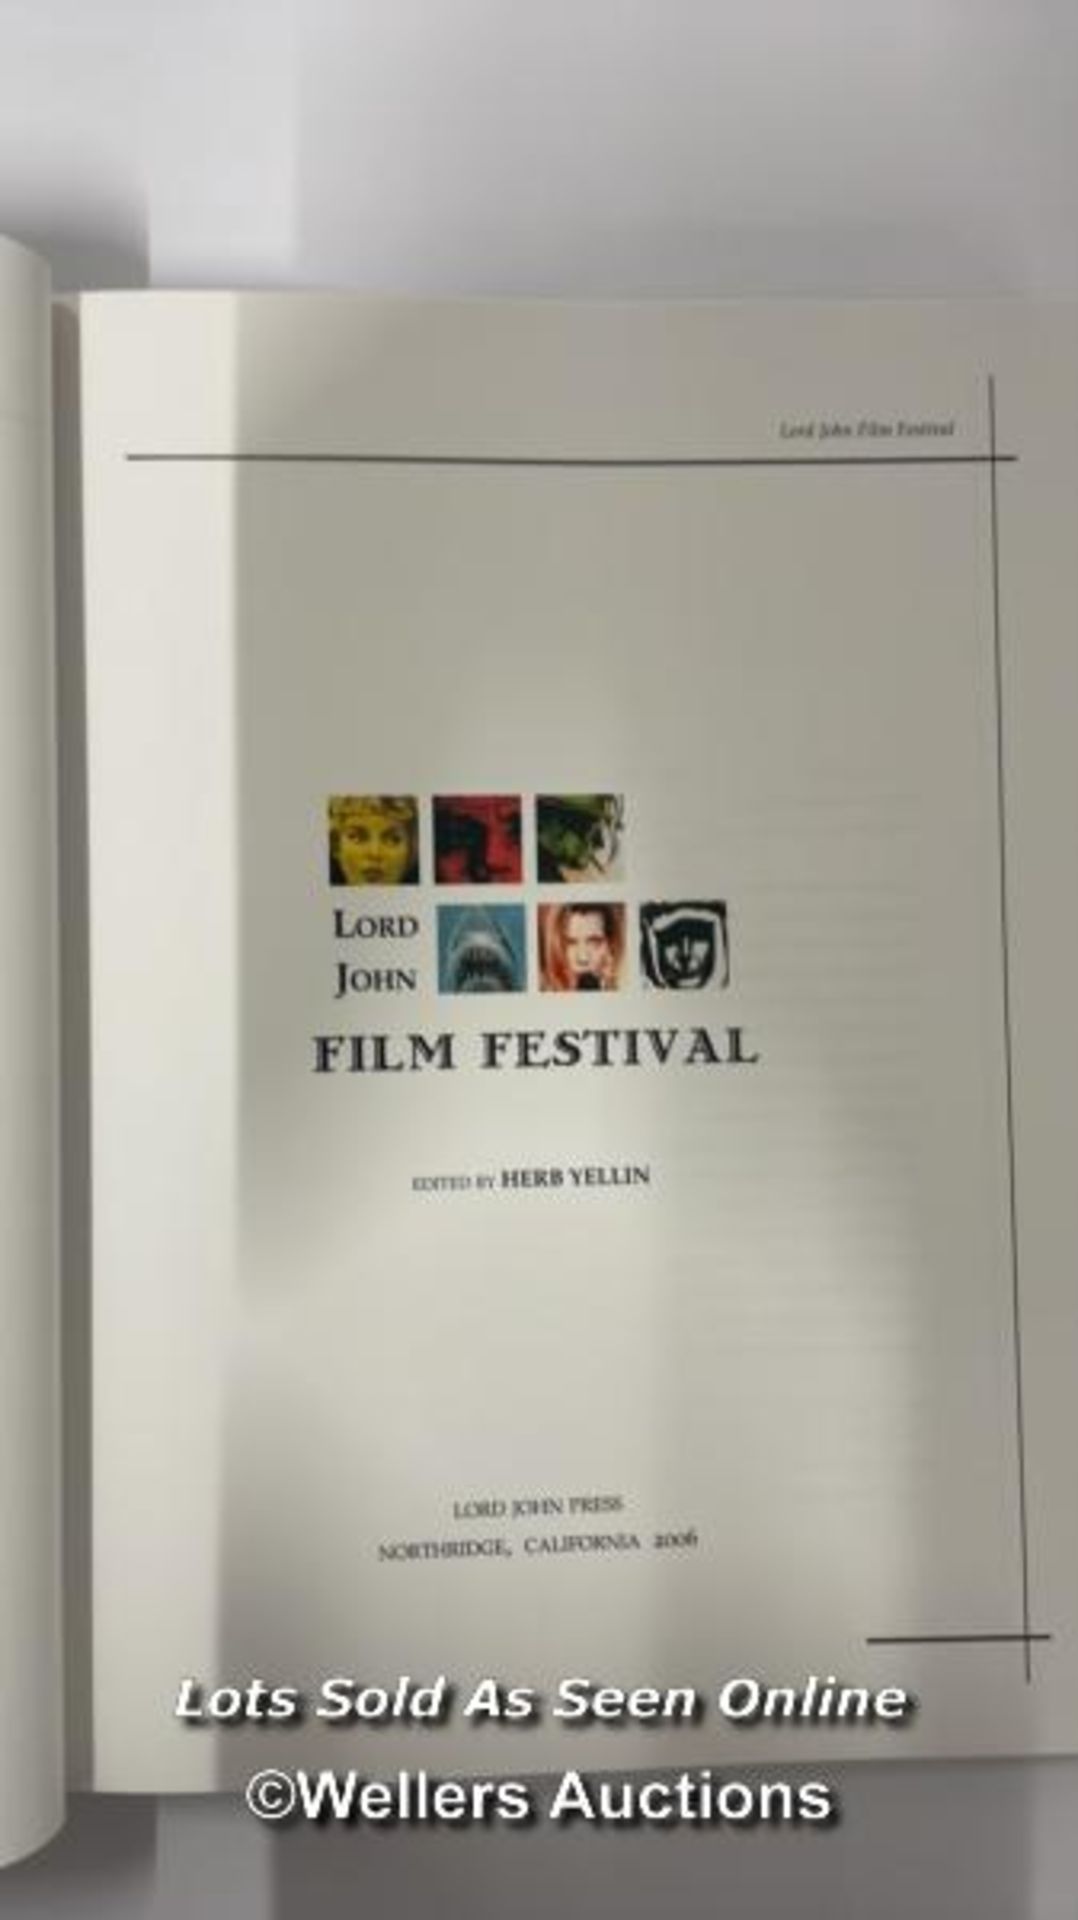 *Film Festival book by Lord John Press, signed by Billy Wilder director of "Some Like It Hot" and " - Image 4 of 9